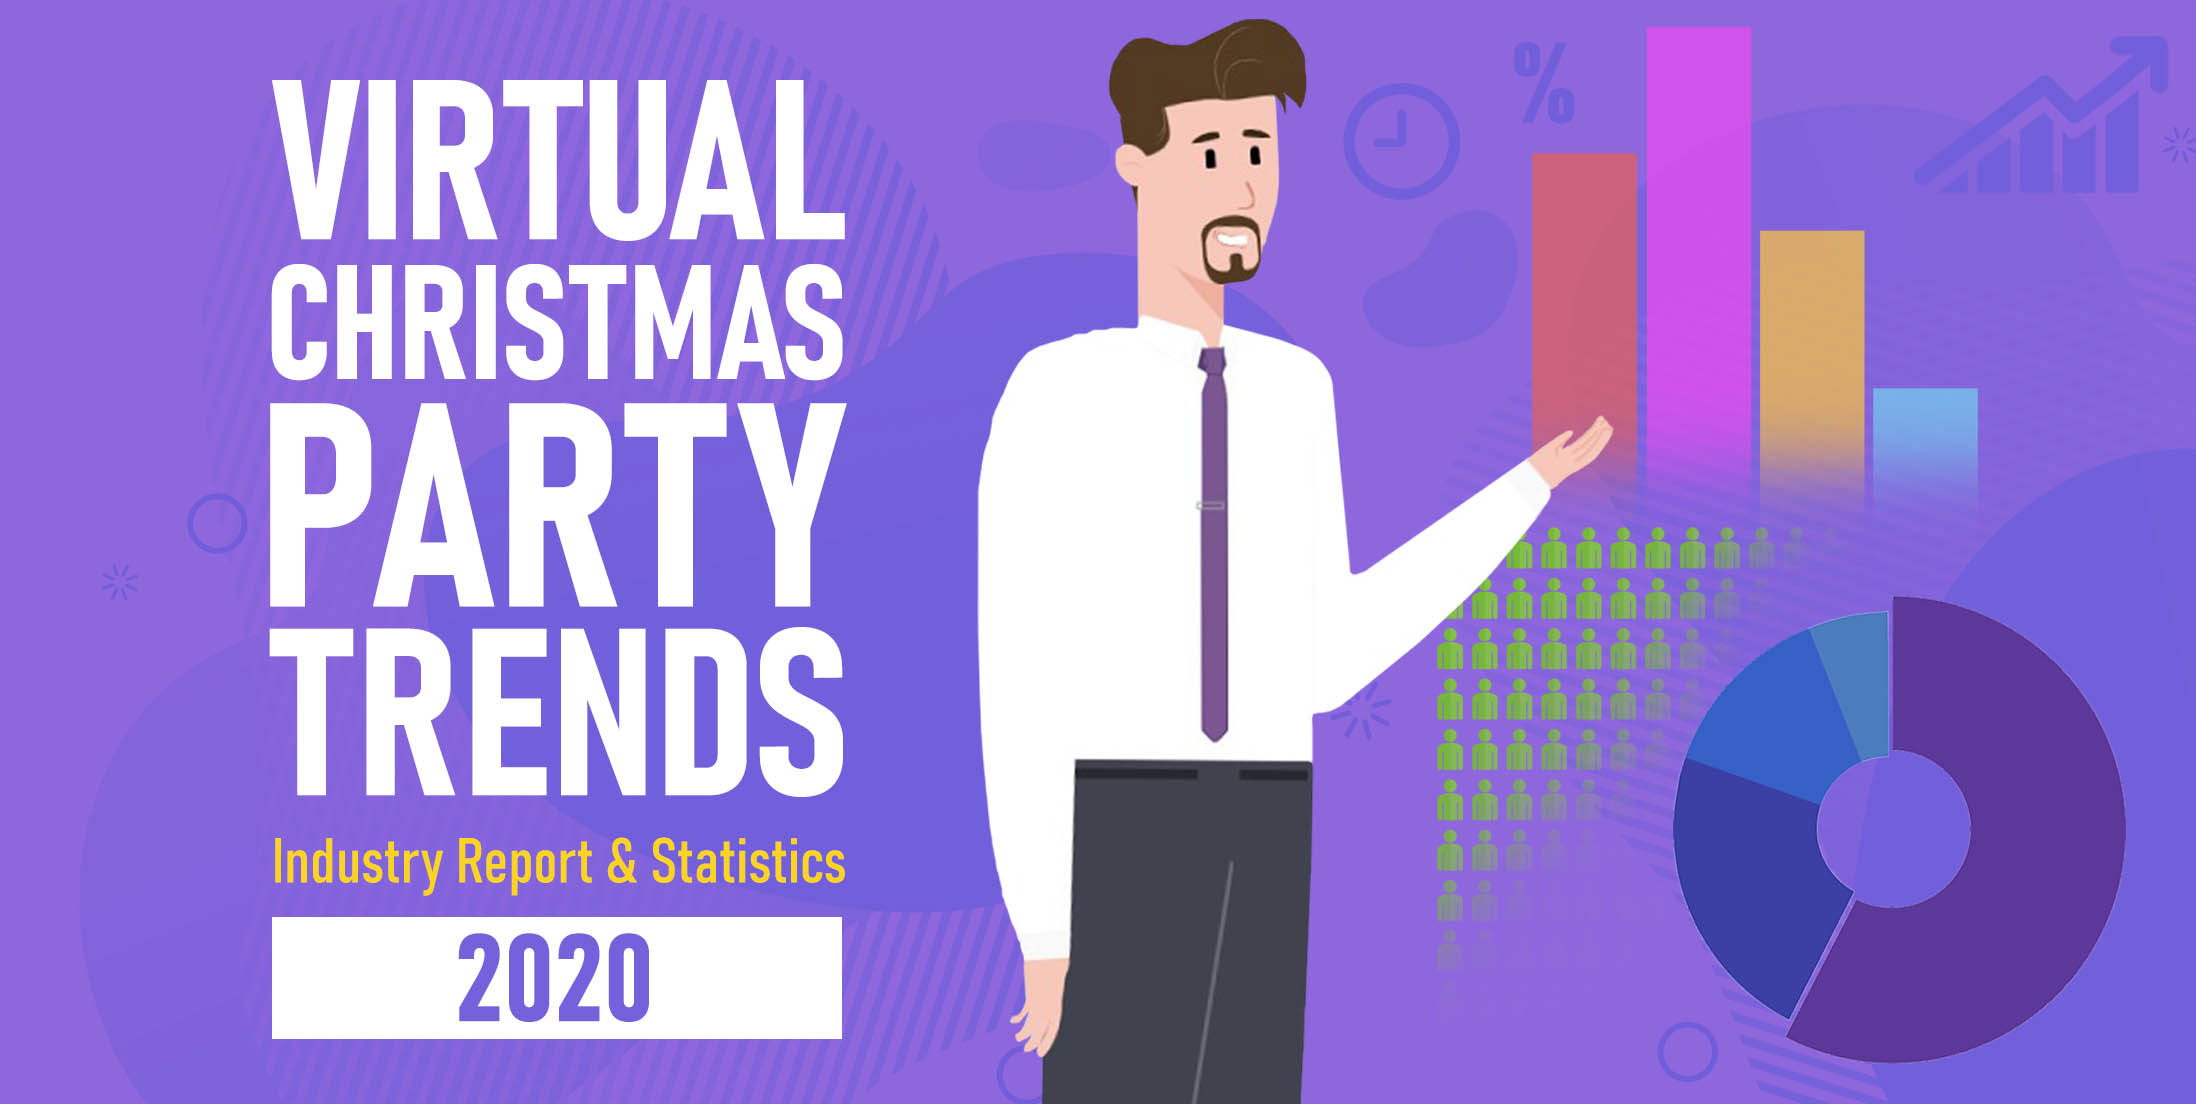 2020 Virtual Christmas Party Trends Industry Report & Statistics 